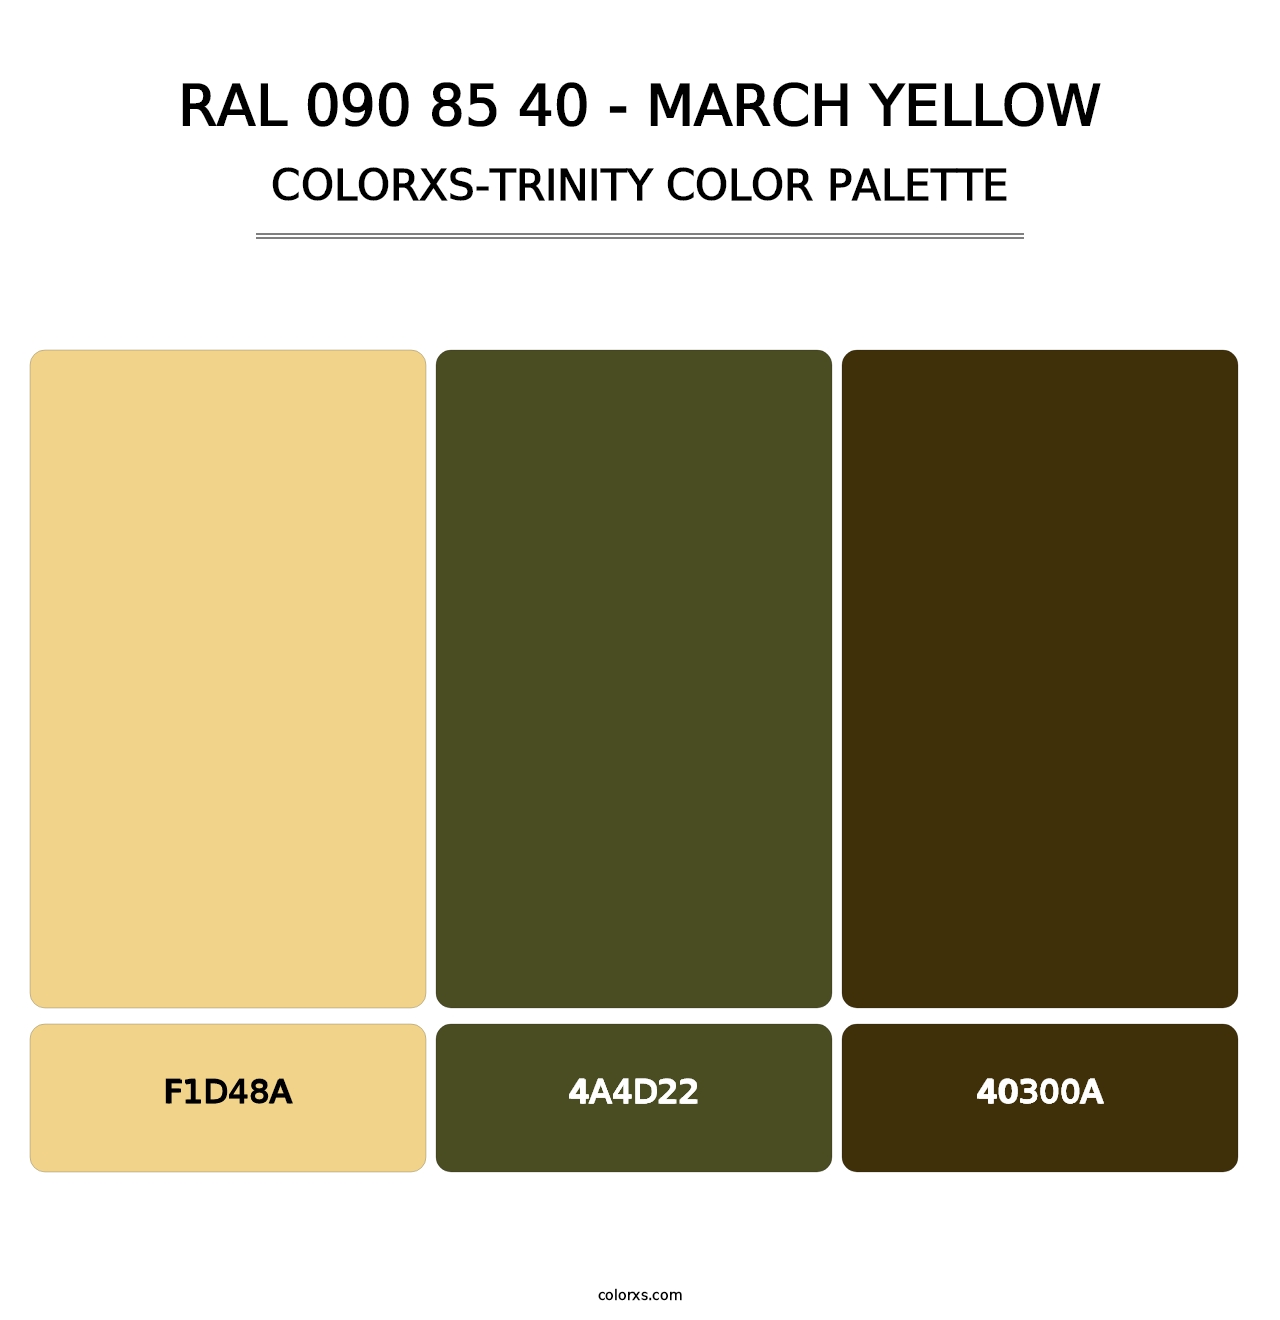 RAL 090 85 40 - March Yellow - Colorxs Trinity Palette